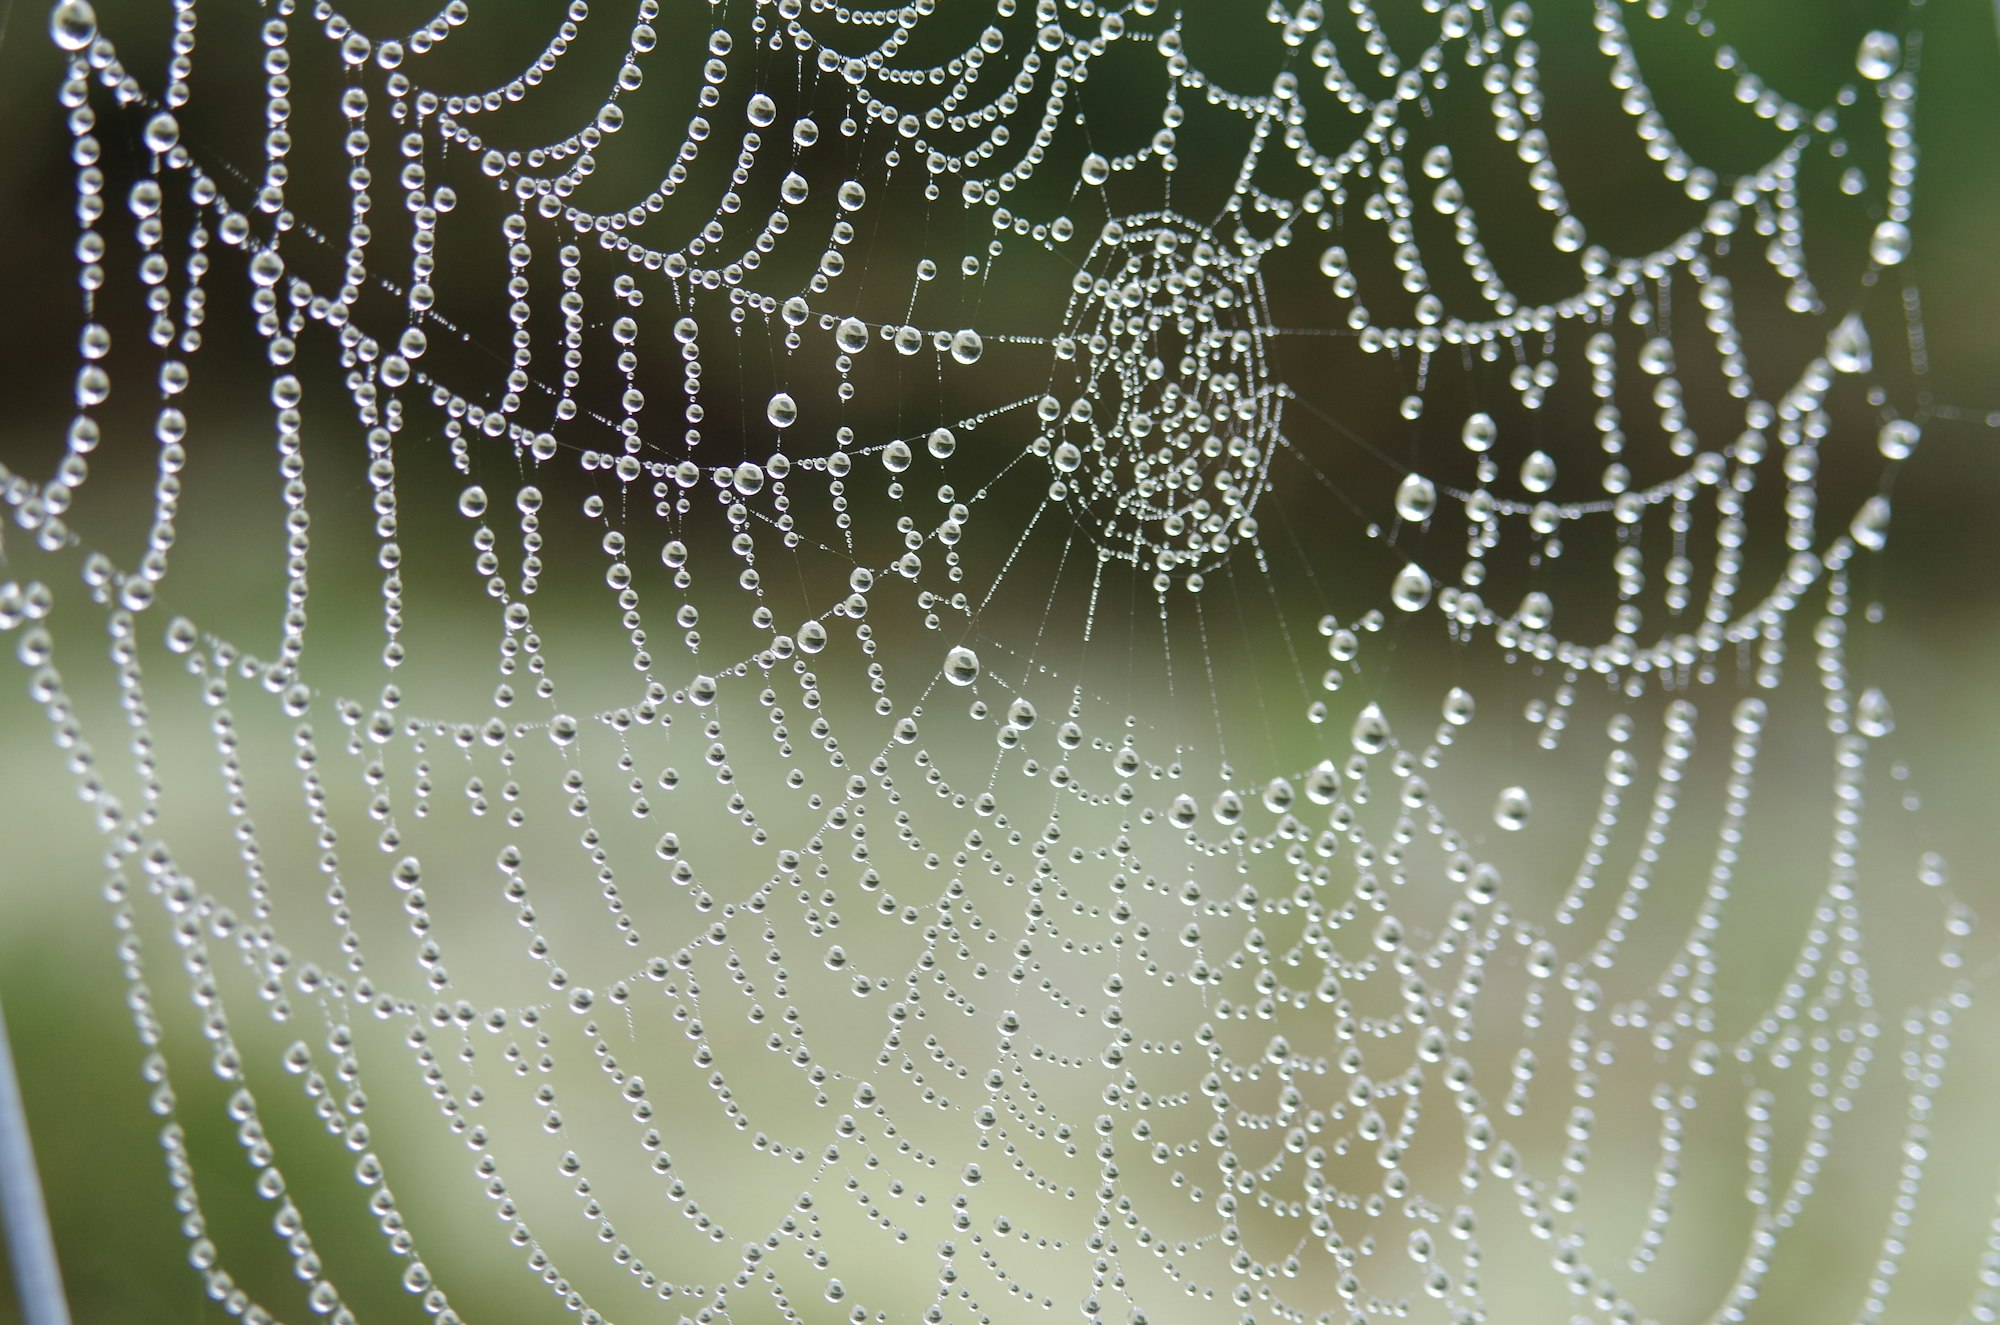 Dew drops on spiders web